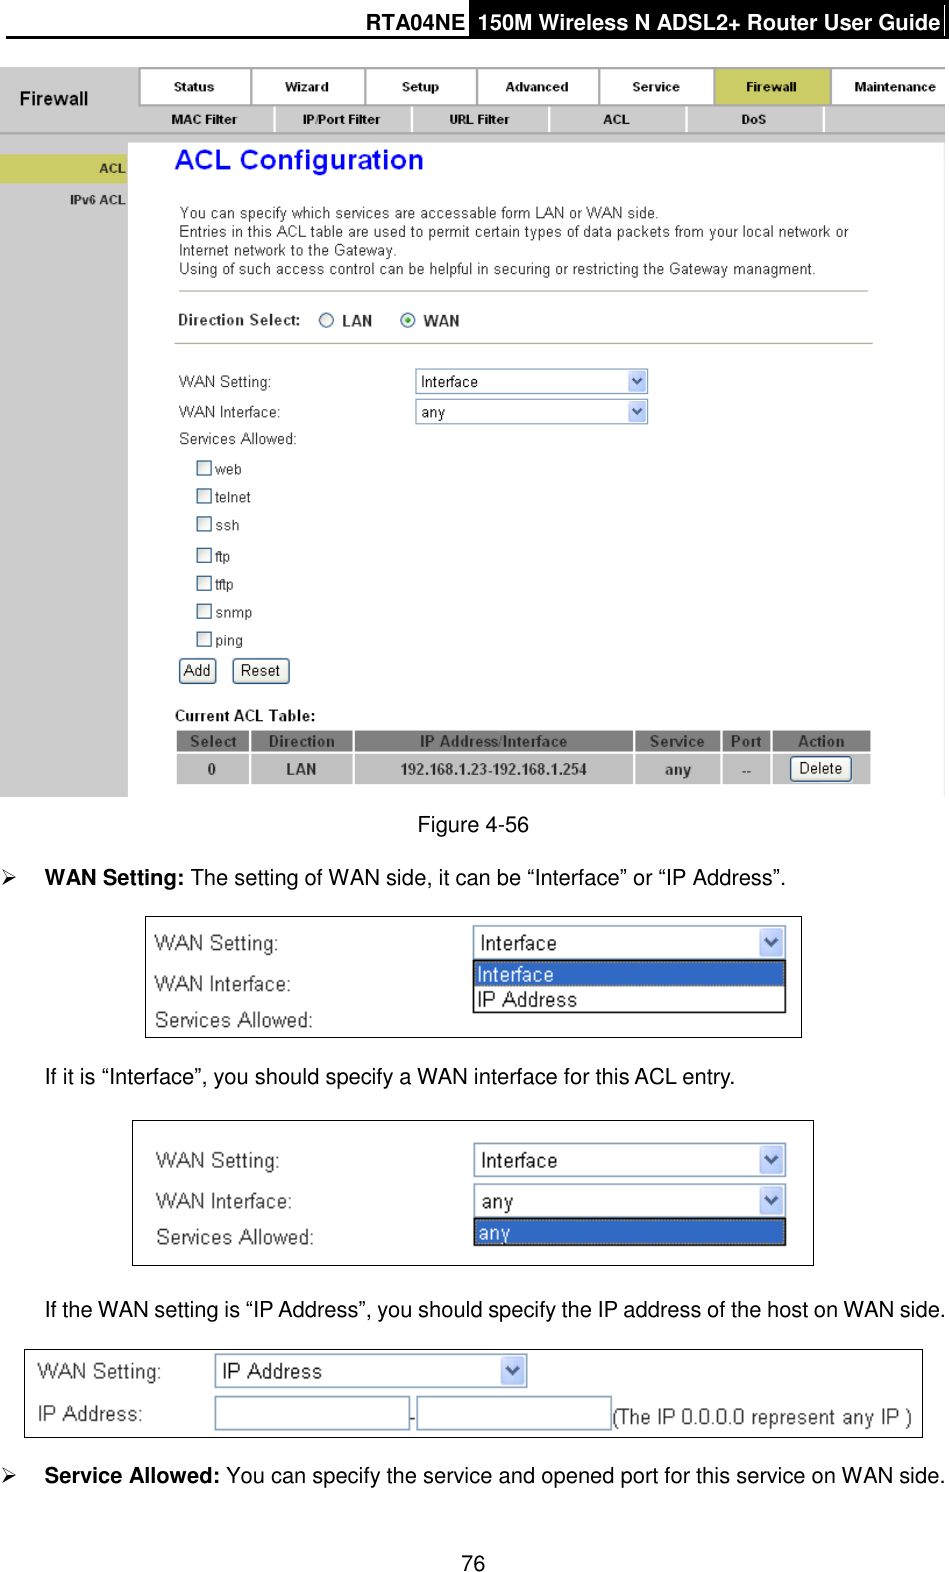 RTA04NE 150M Wireless N ADSL2+ Router User Guide  76  Figure 4-56  WAN Setting: The setting of WAN side, it can be “Interface” or “IP Address”.    If it is “Interface”, you should specify a WAN interface for this ACL entry.    If the WAN setting is “IP Address”, you should specify the IP address of the host on WAN side.   Service Allowed: You can specify the service and opened port for this service on WAN side. 